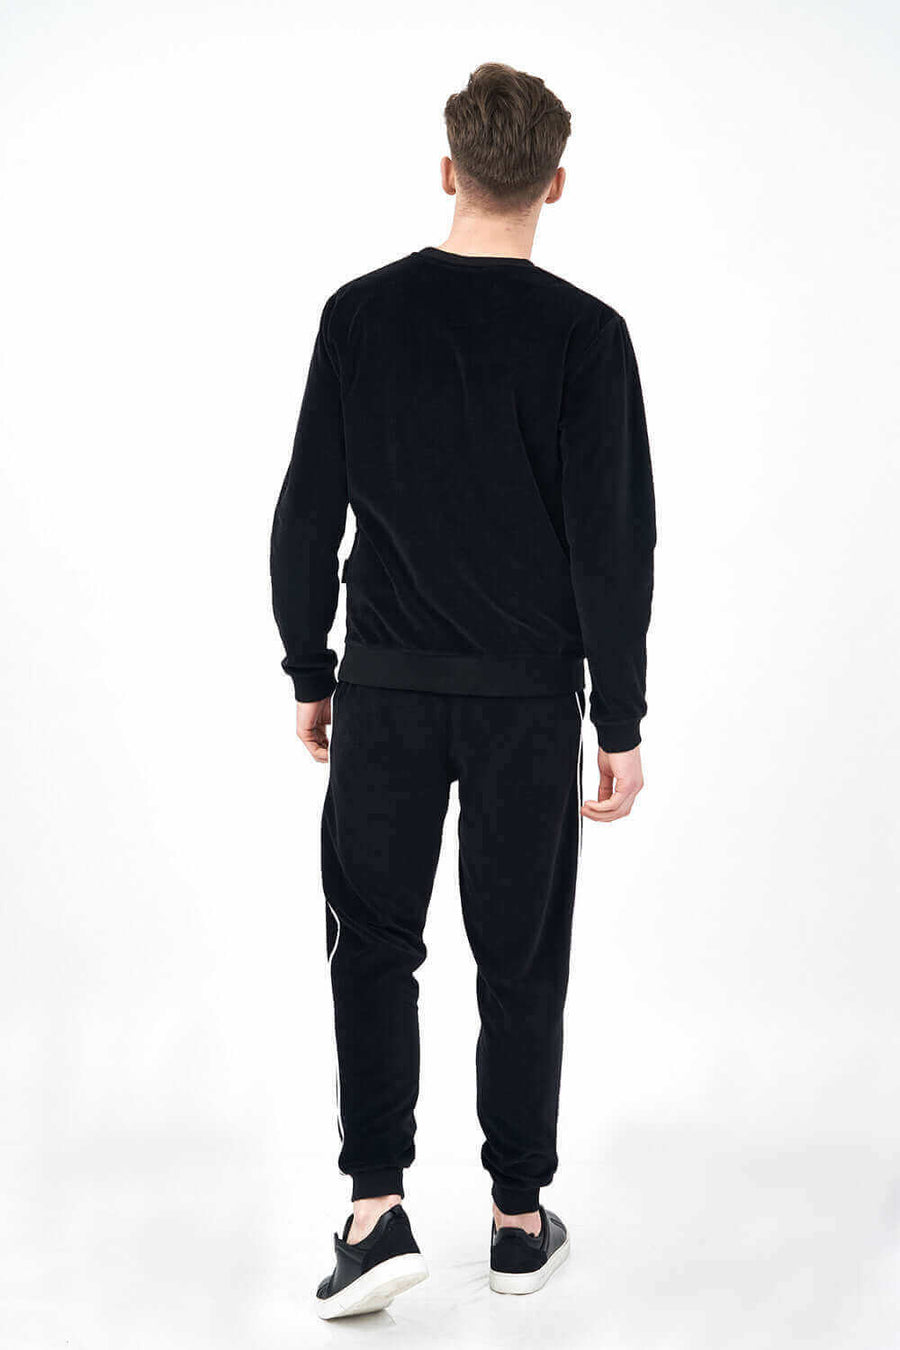 Back View of Velour Men's Tracksuit Set with contrast Piping